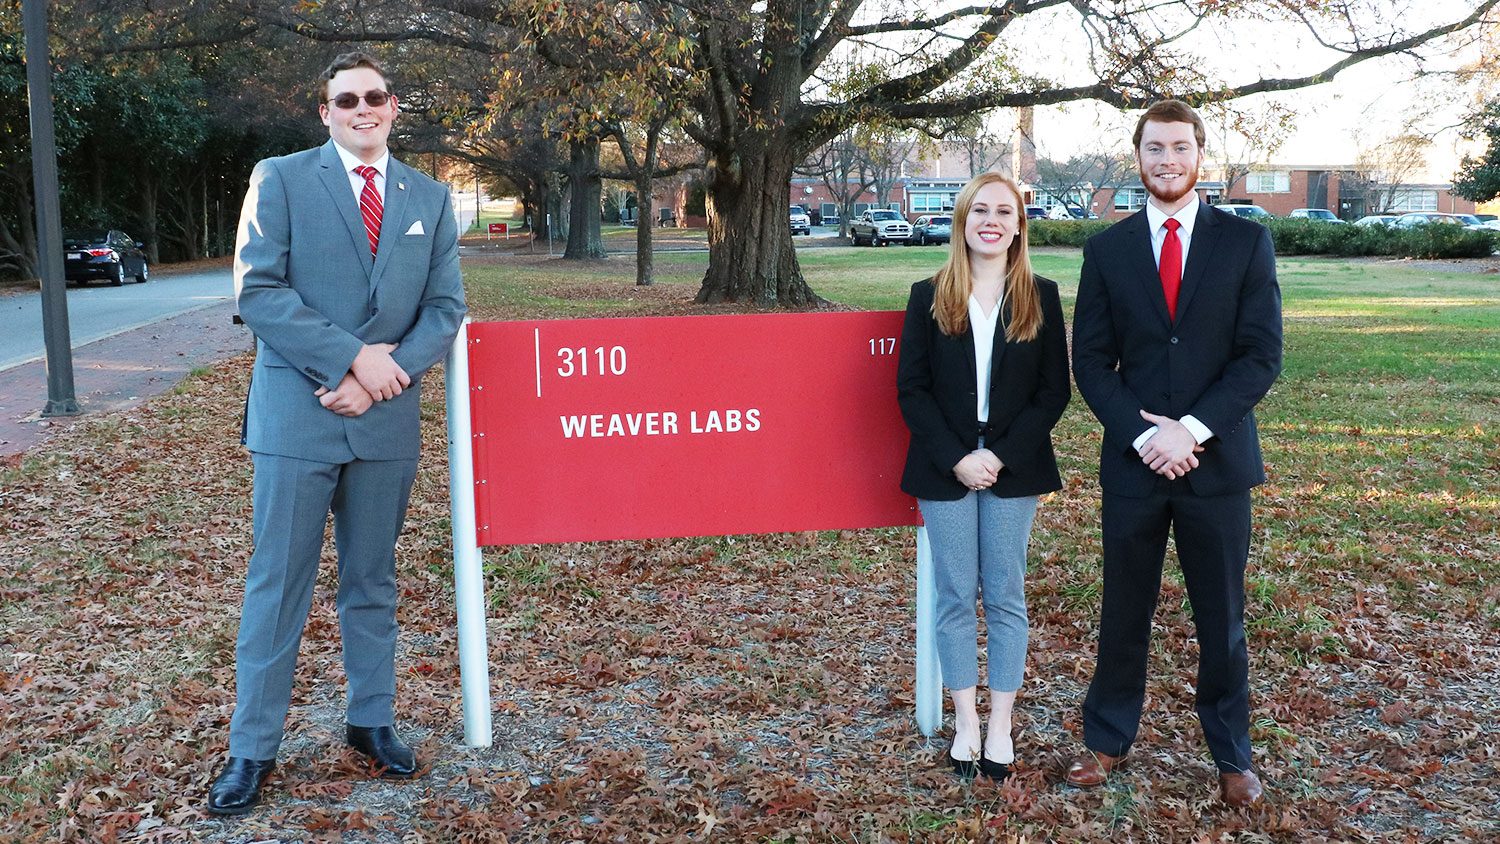 NC State students Matthew Parker, Lauryn Kabrich and Alex Greeson with the Weaver Labs sign.